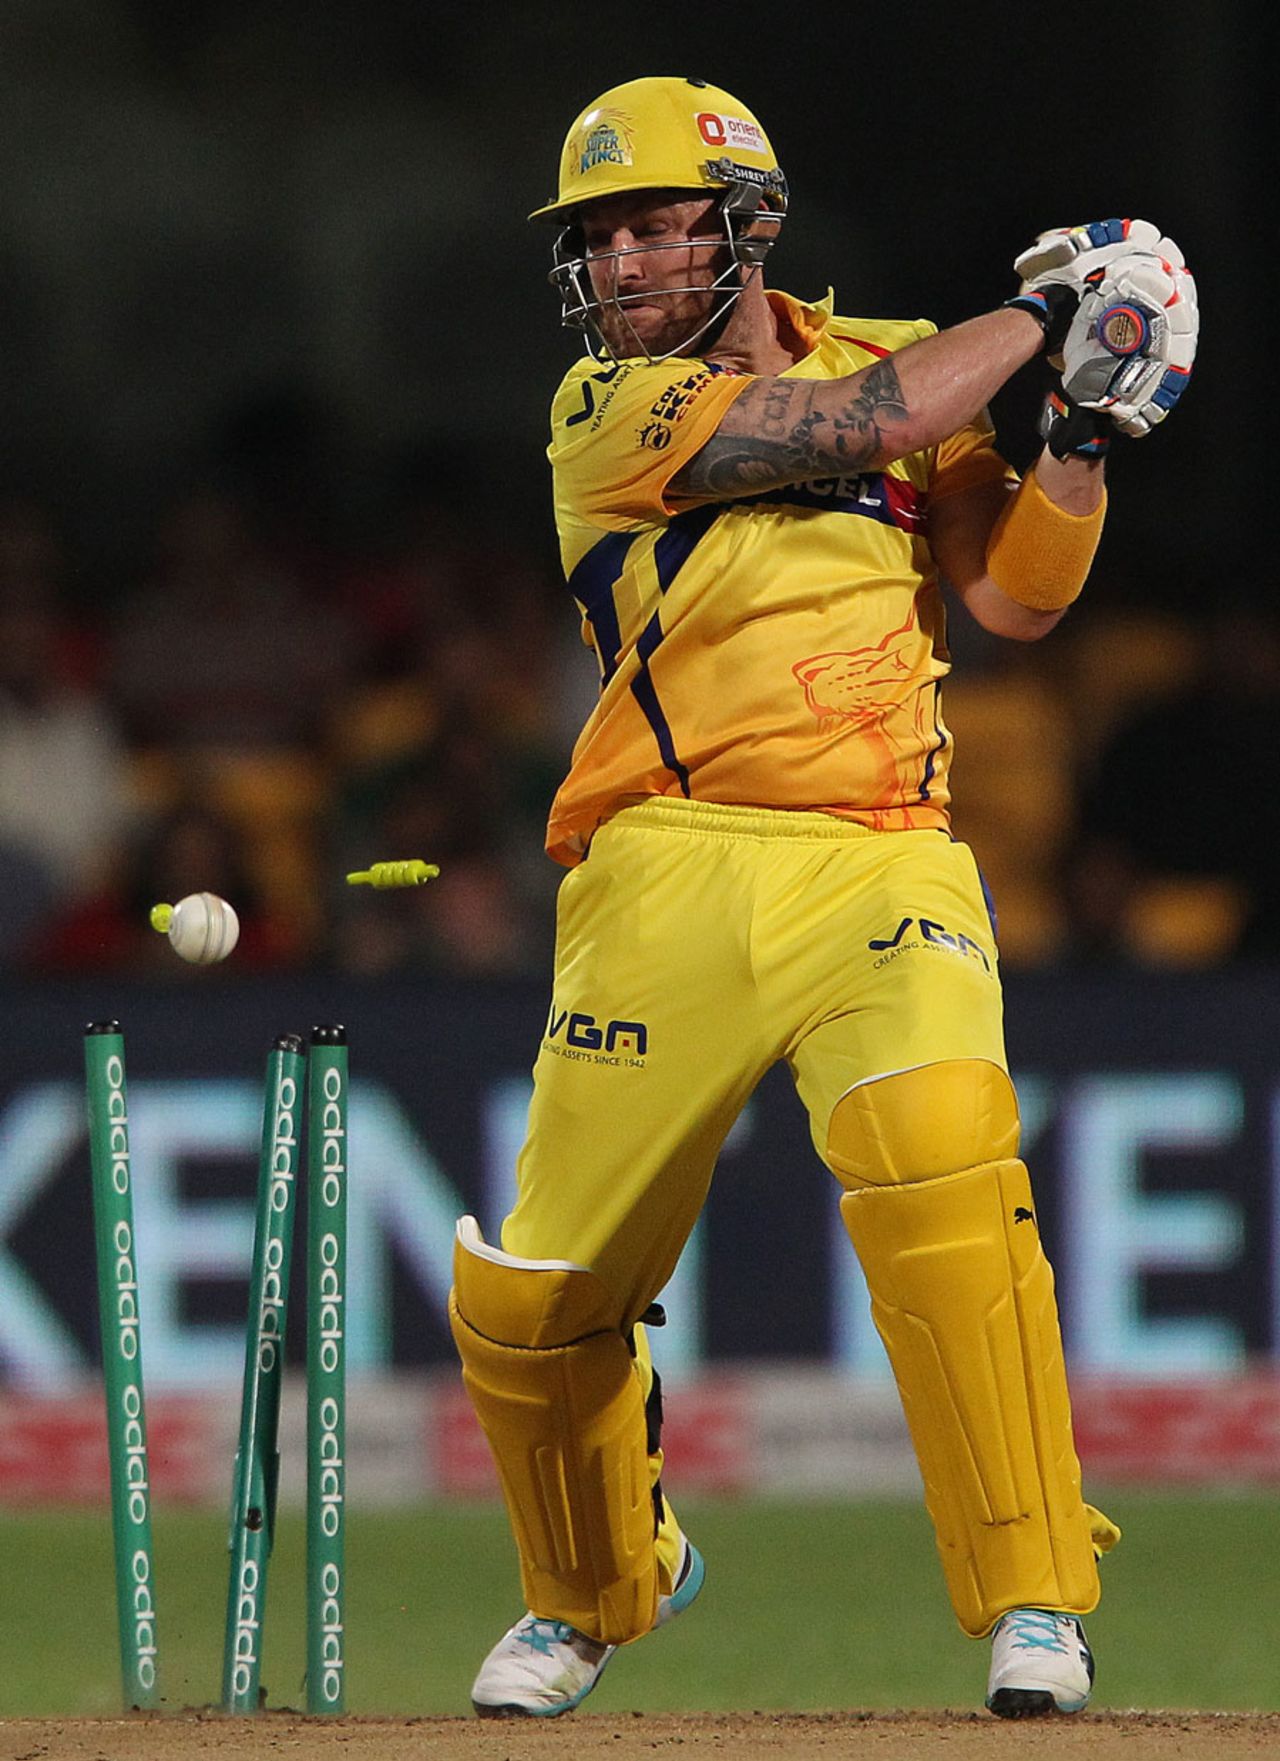 Brendon McCullum was bowled for 11, Chennai Super Kings v Perth Scorchers, Champions League T20, Bangalore, September 27, 2014